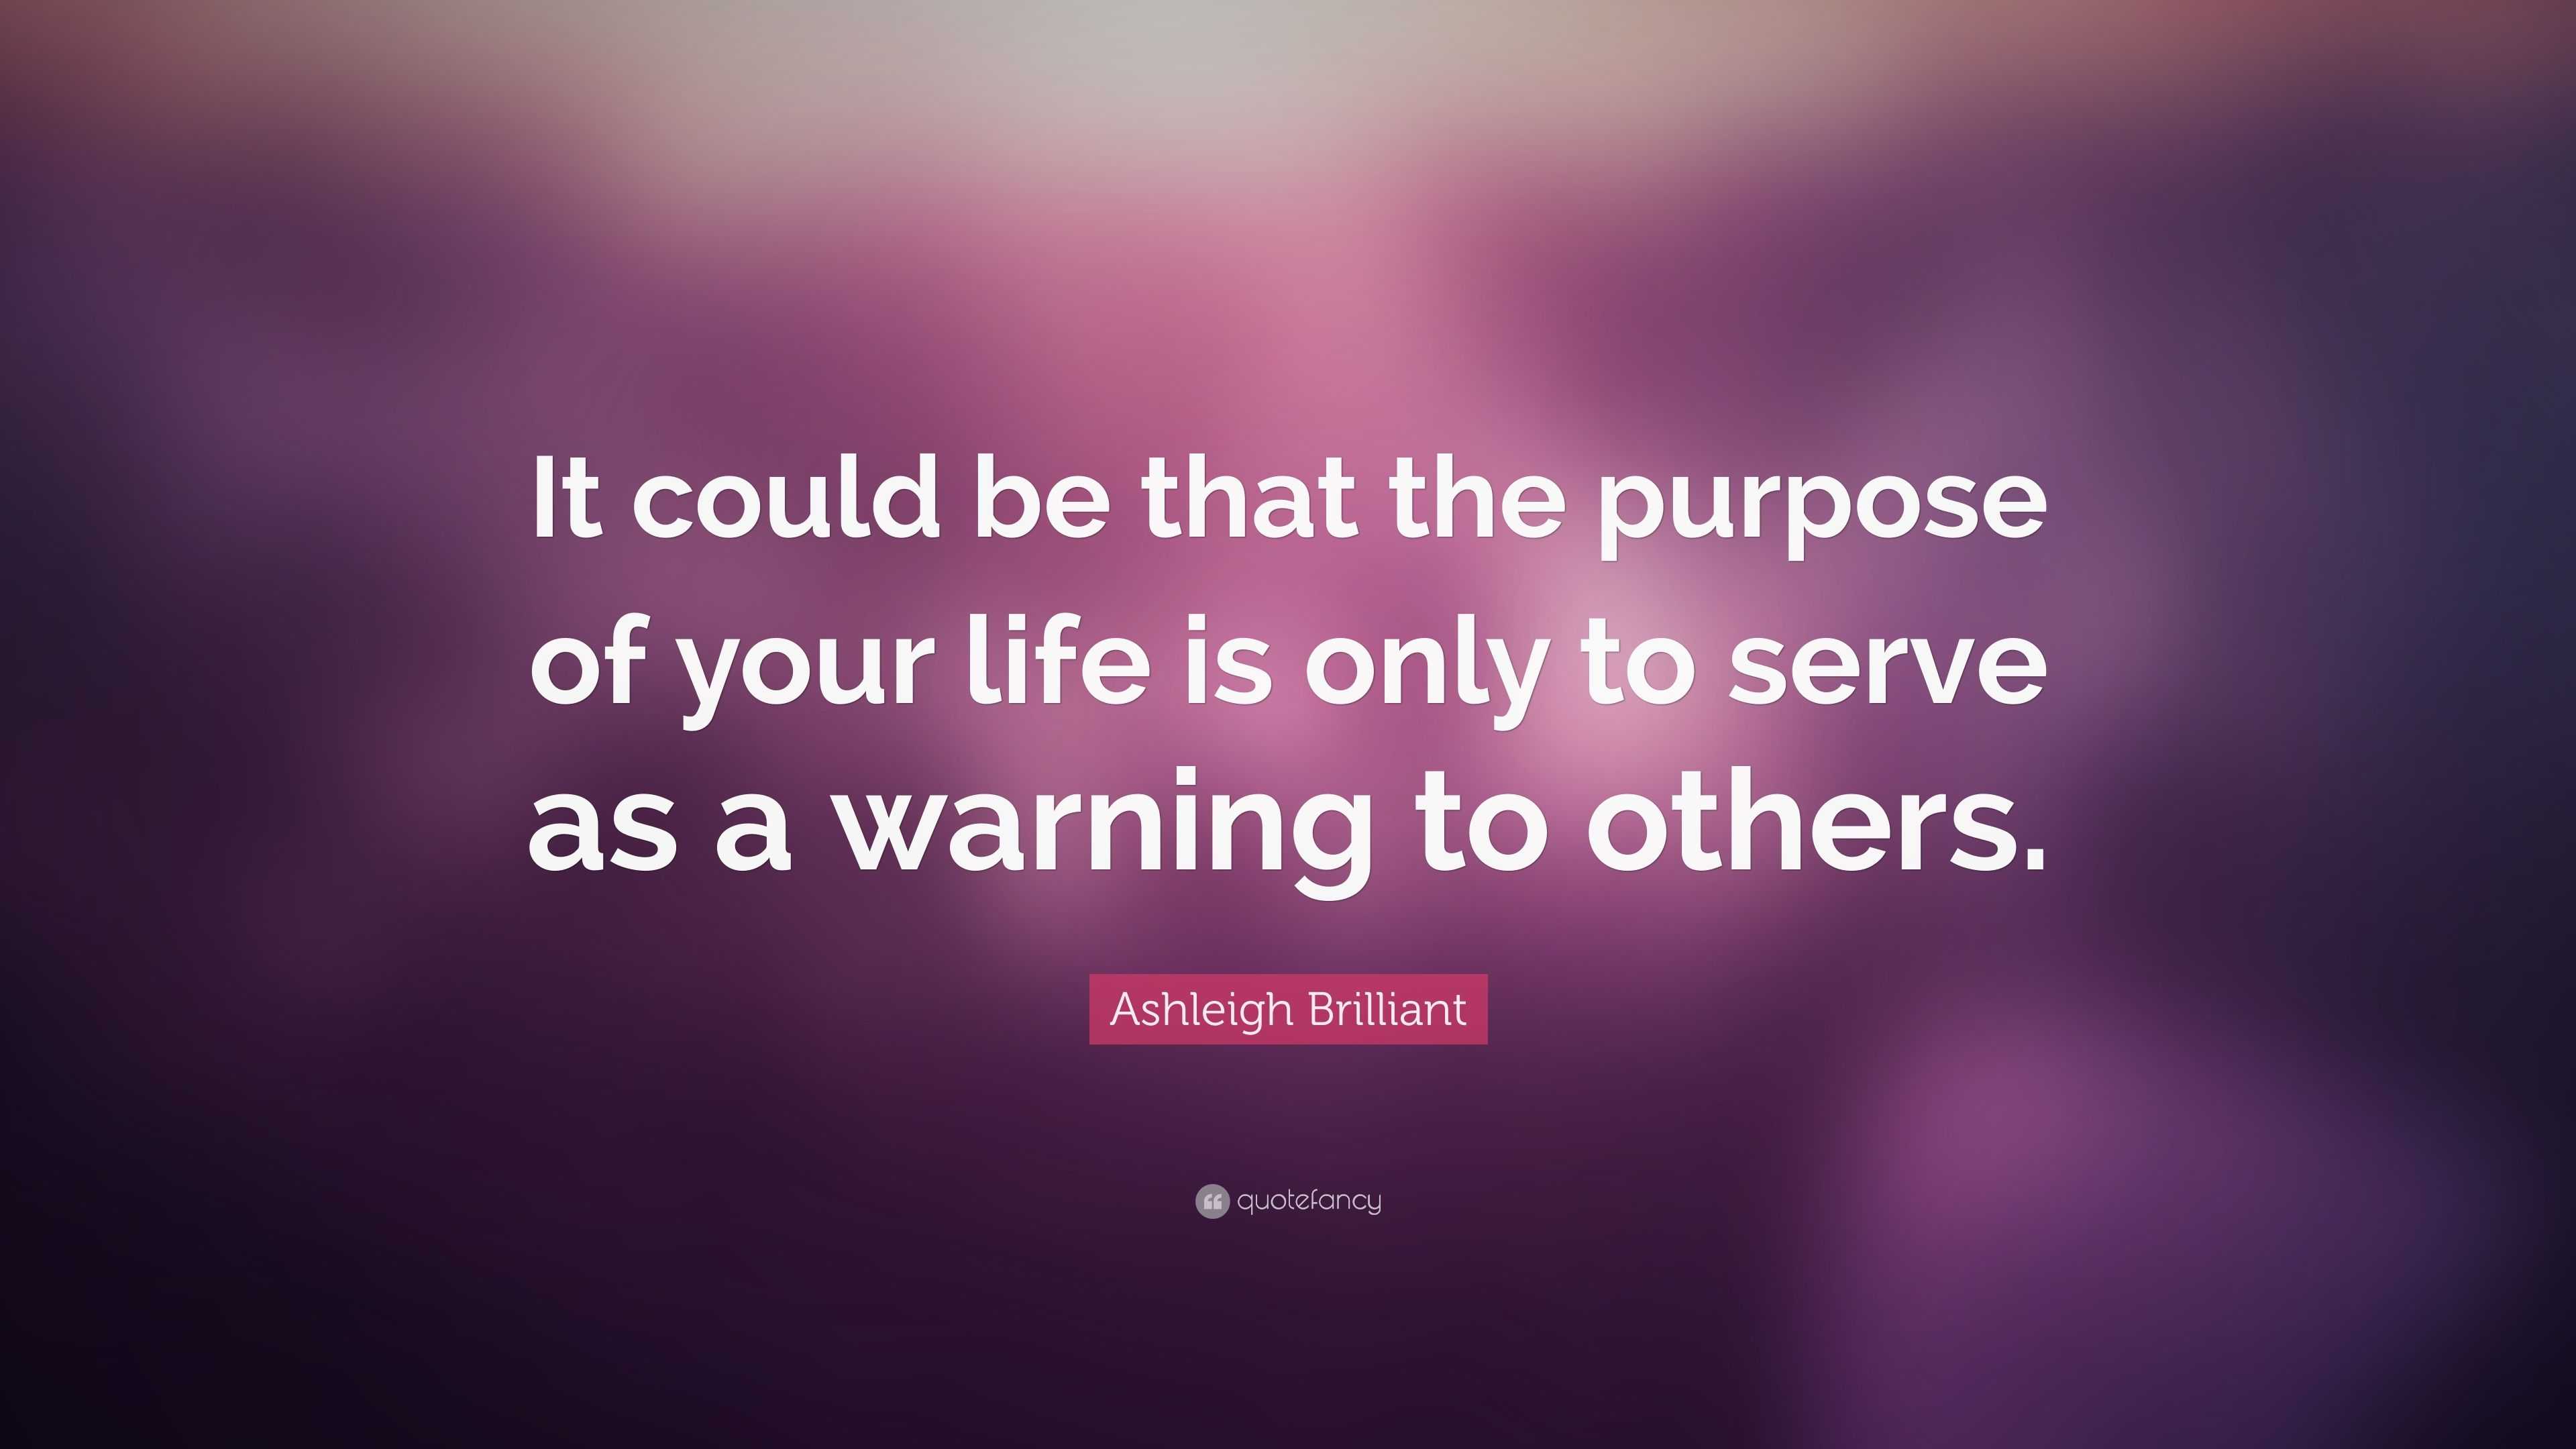 Ashleigh Brilliant Quote: “It could be that the purpose of your life is ...